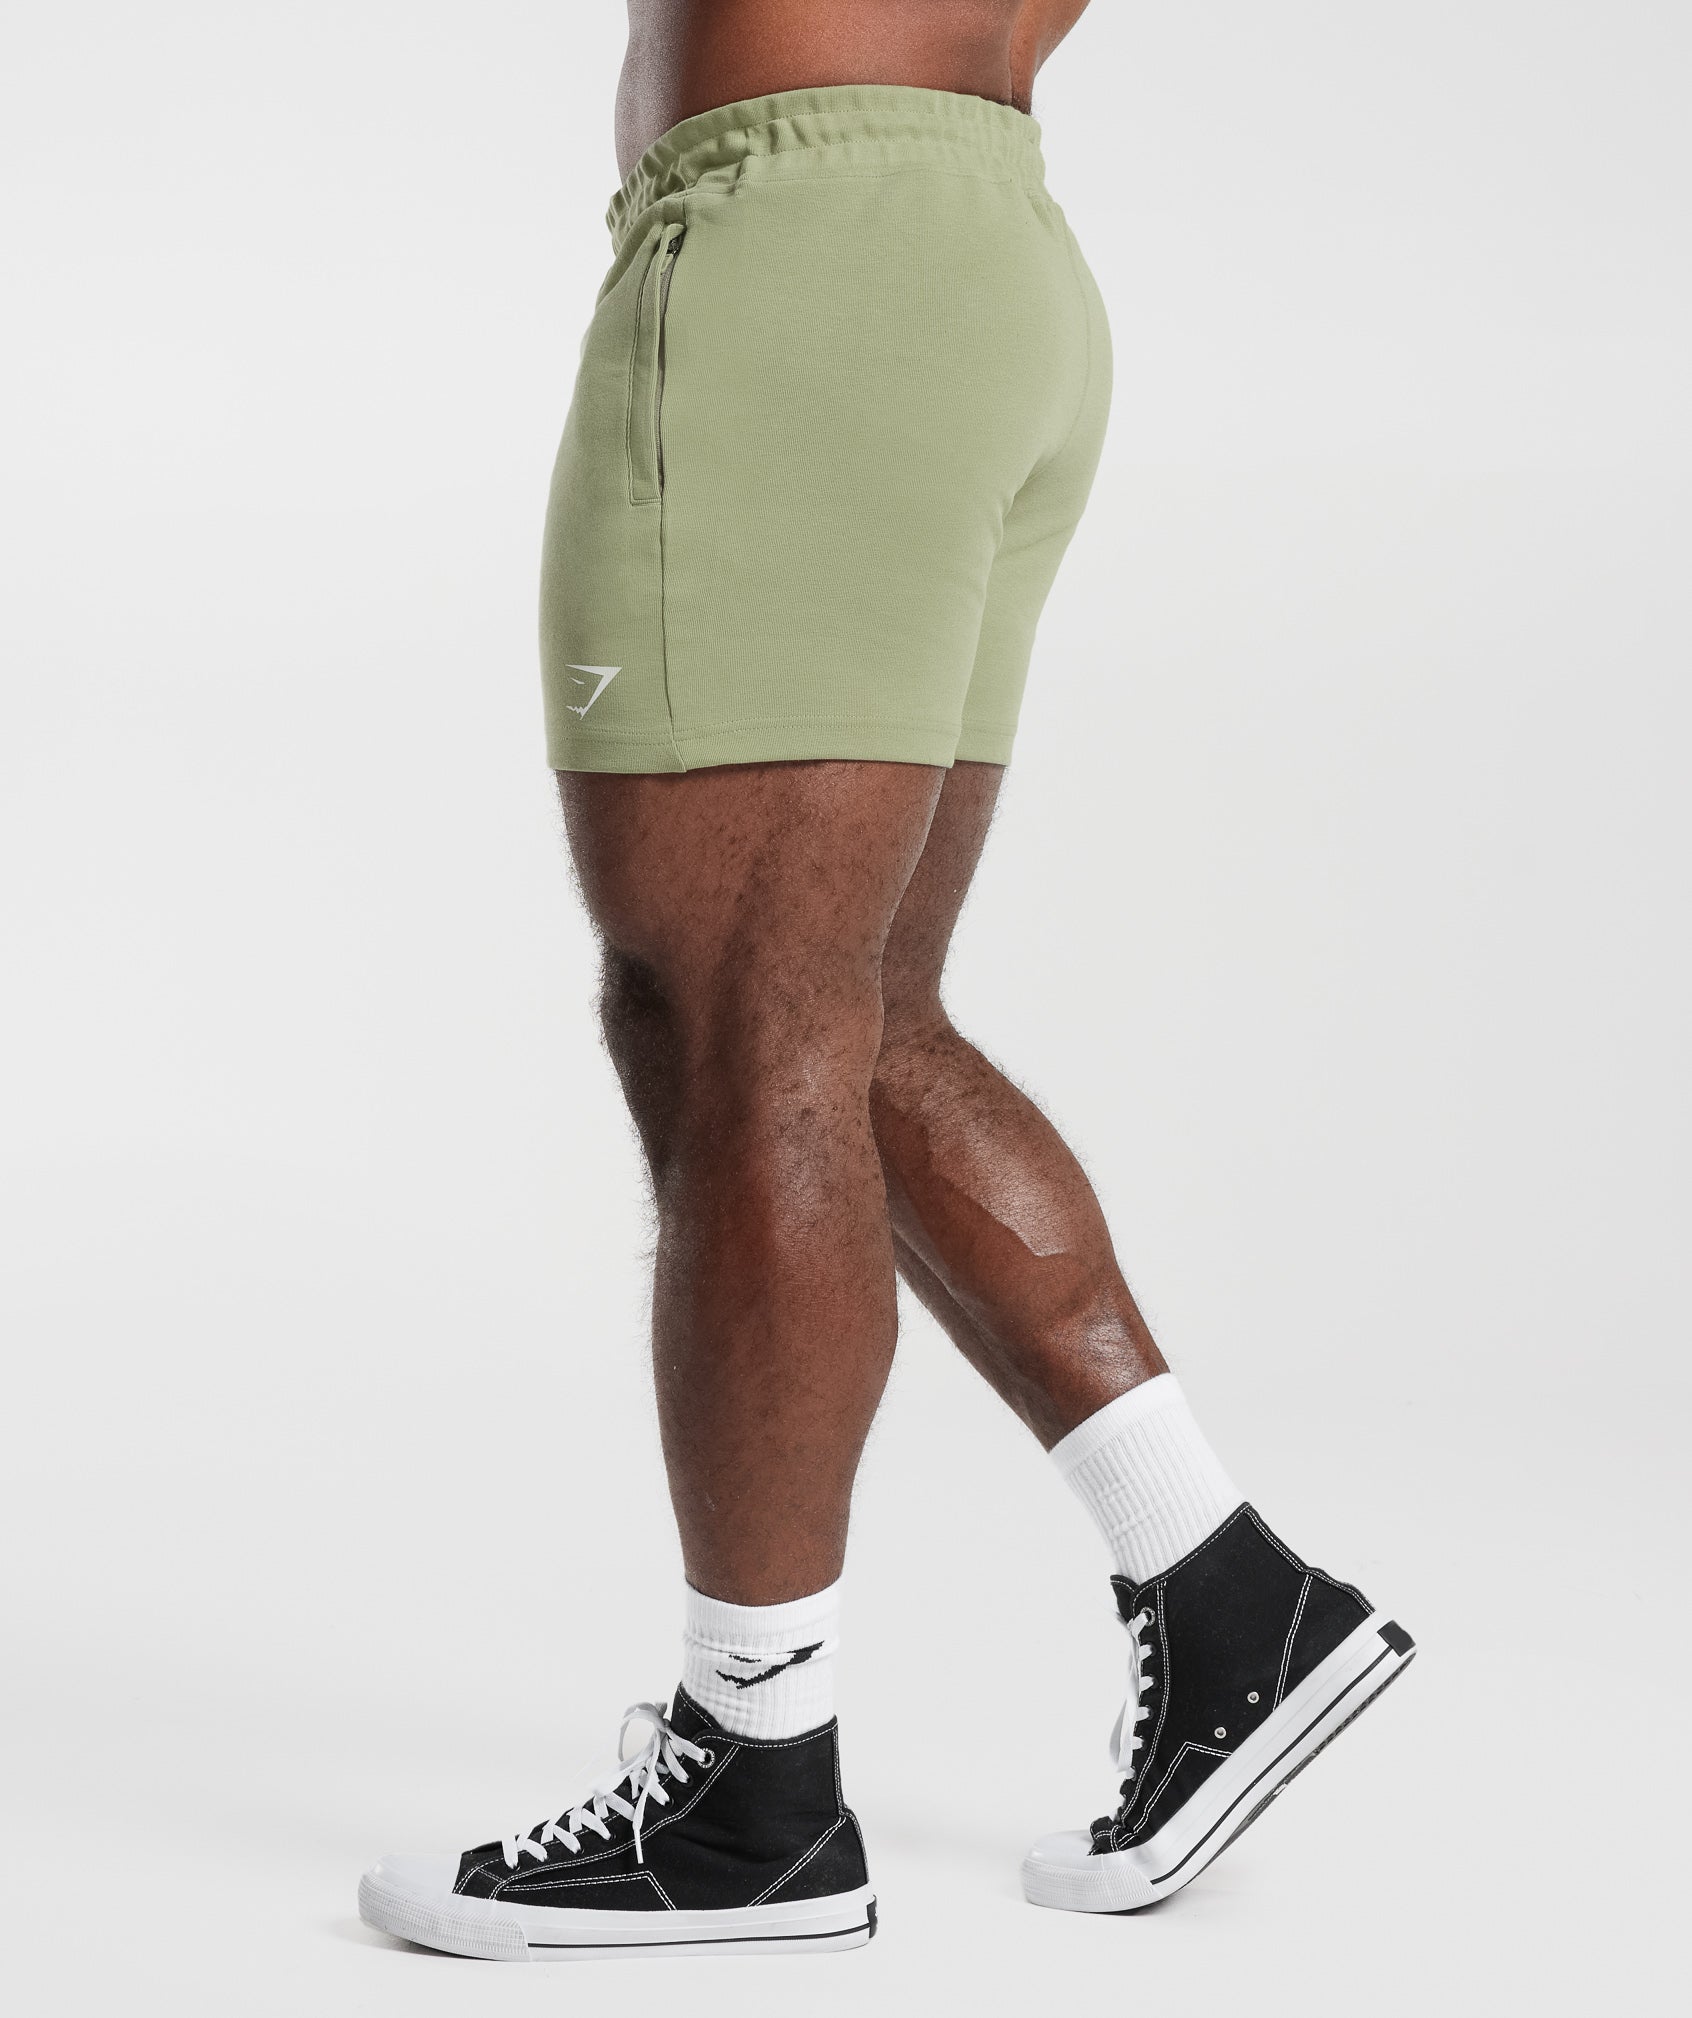 React 5" Shorts in Light Sage Green - view 5